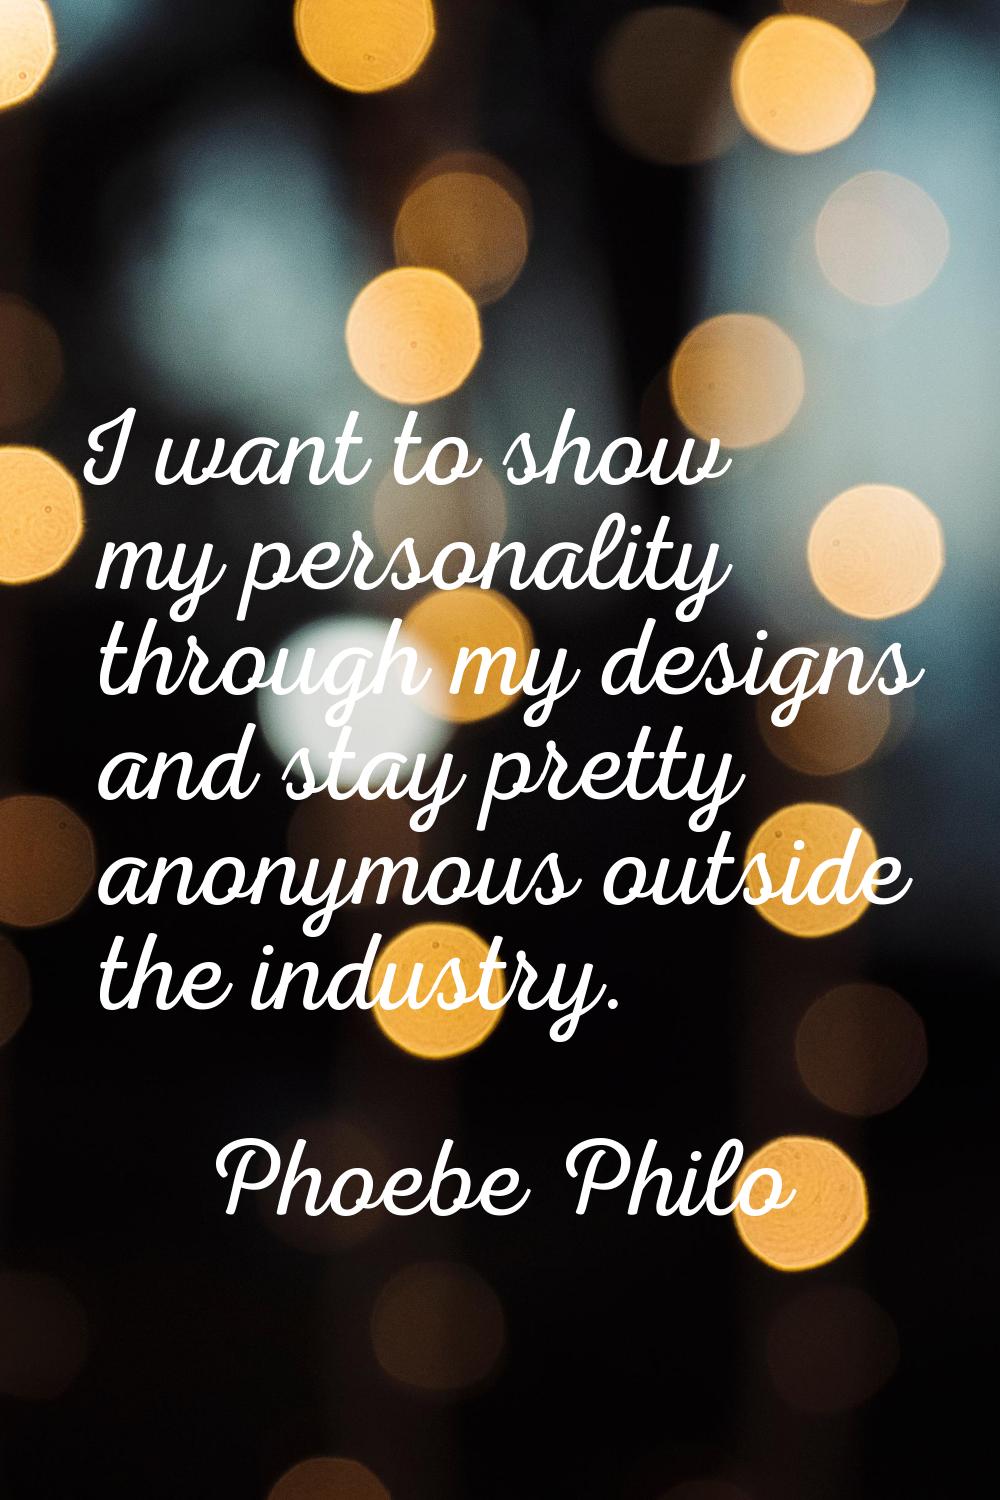 I want to show my personality through my designs and stay pretty anonymous outside the industry.